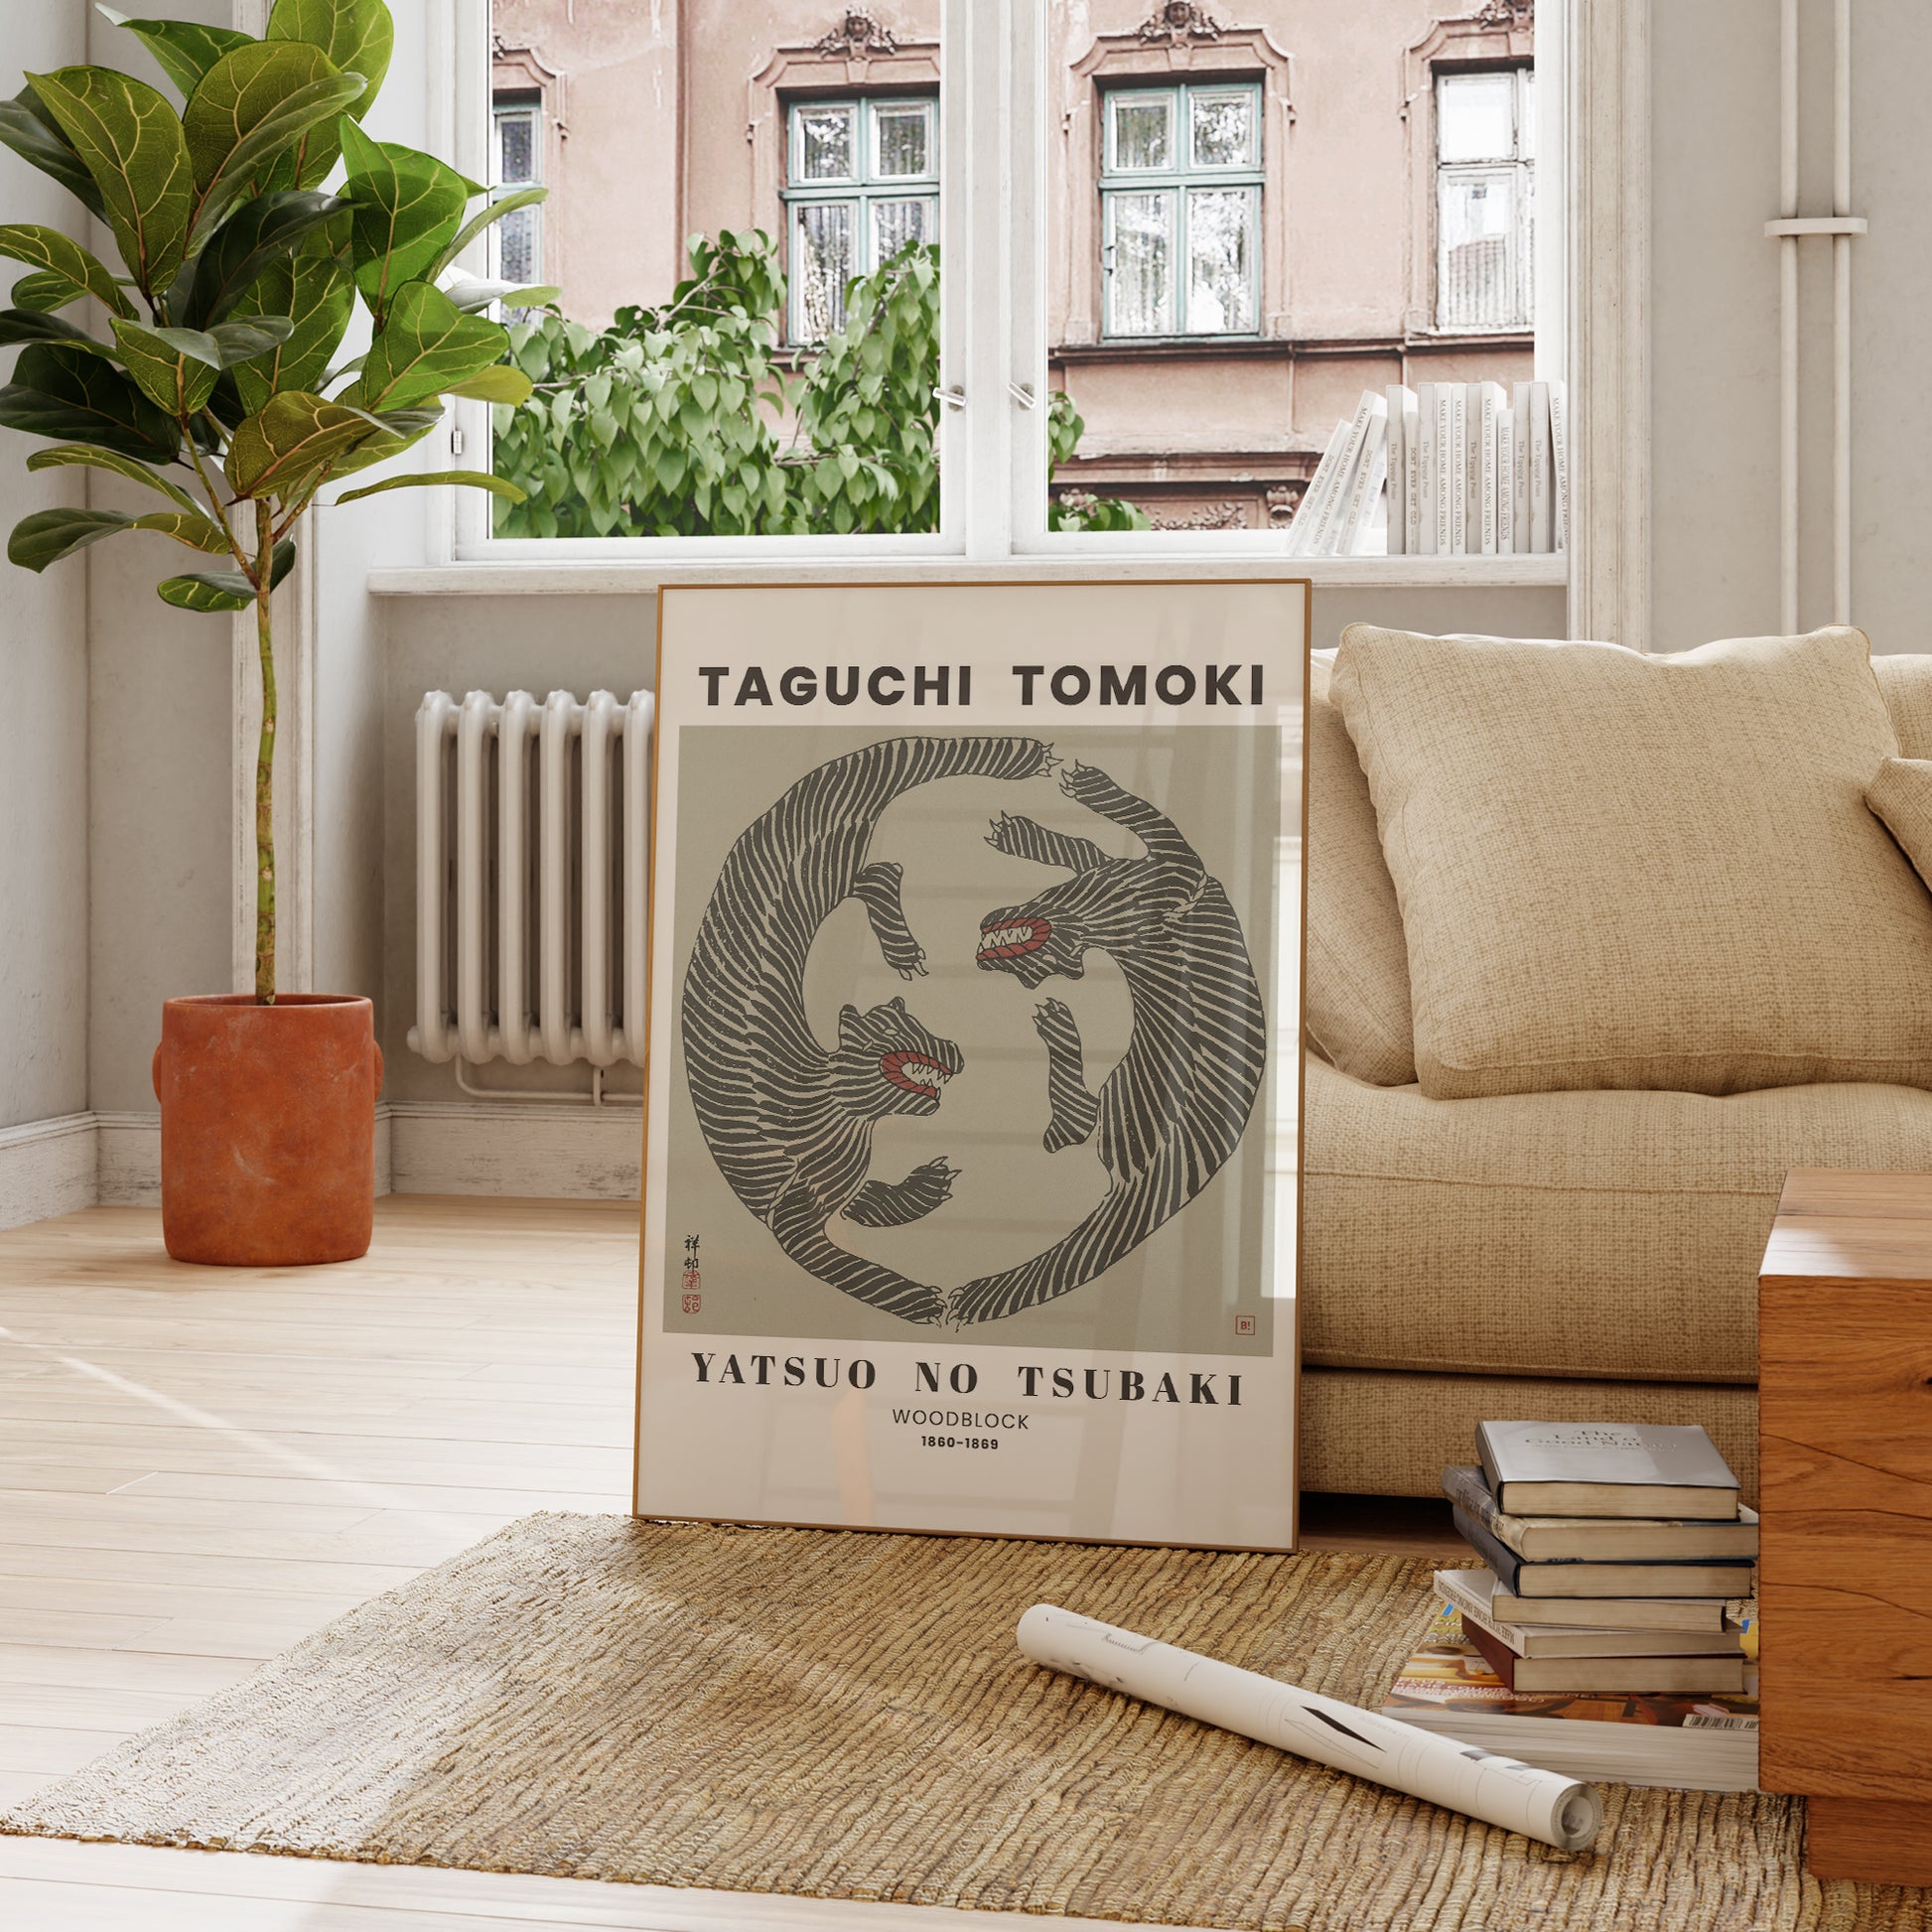 Be inspired by our remastered Taguchi Tomoki Woodblock Tigers Sage Green exhibition art print. This artwork was printed using the giclée process on archival acid-free paper and is presented in a french living room that captures its timeless beauty in every detail.